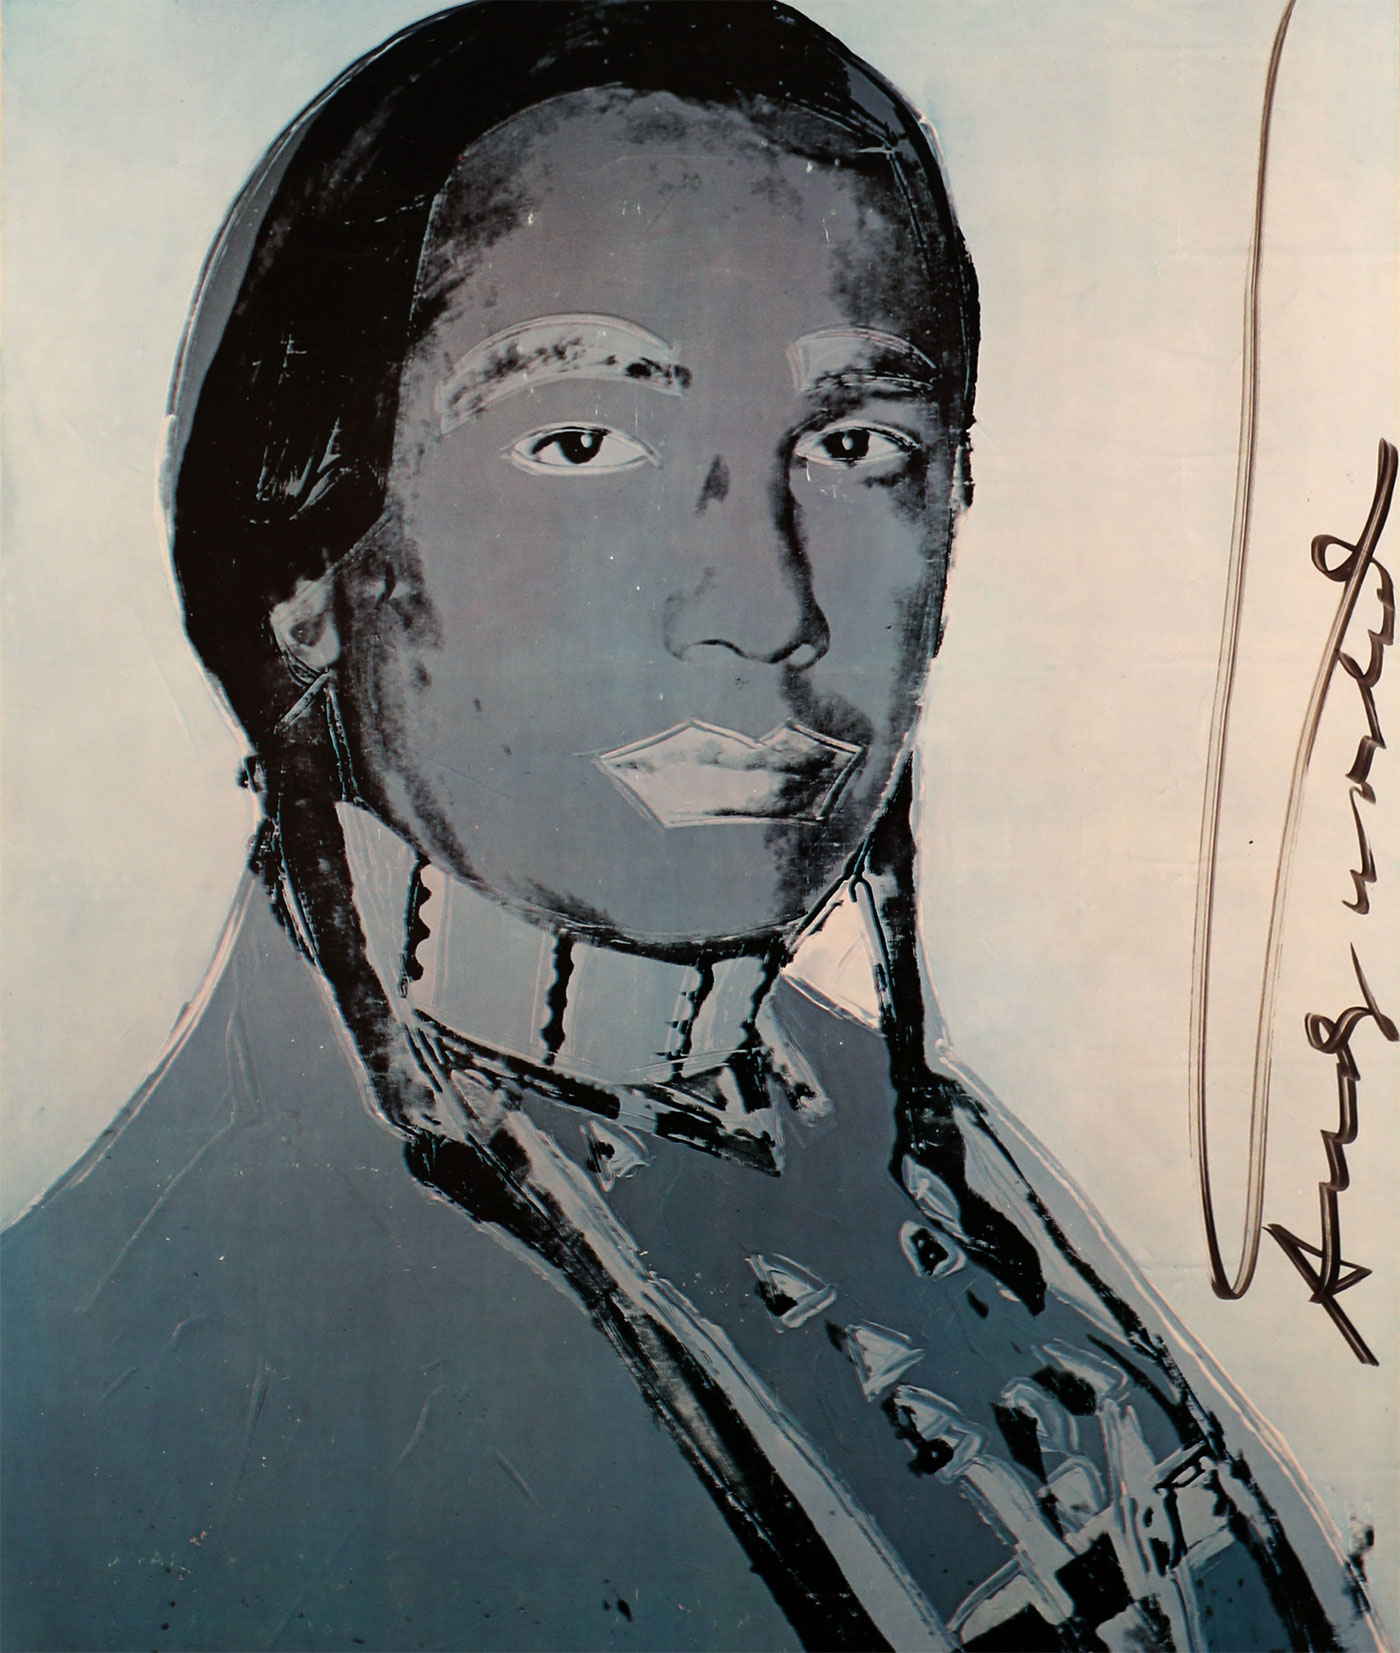 Offset lithograph of a three quarter shoulders and face portrait of Russell Means in shades of blue and black. Means looks out at the viewer with his hair parted and braided. He is wearing native attire. Andy Warhol’s signature is written in sharpie vertically along the left edge of the image.